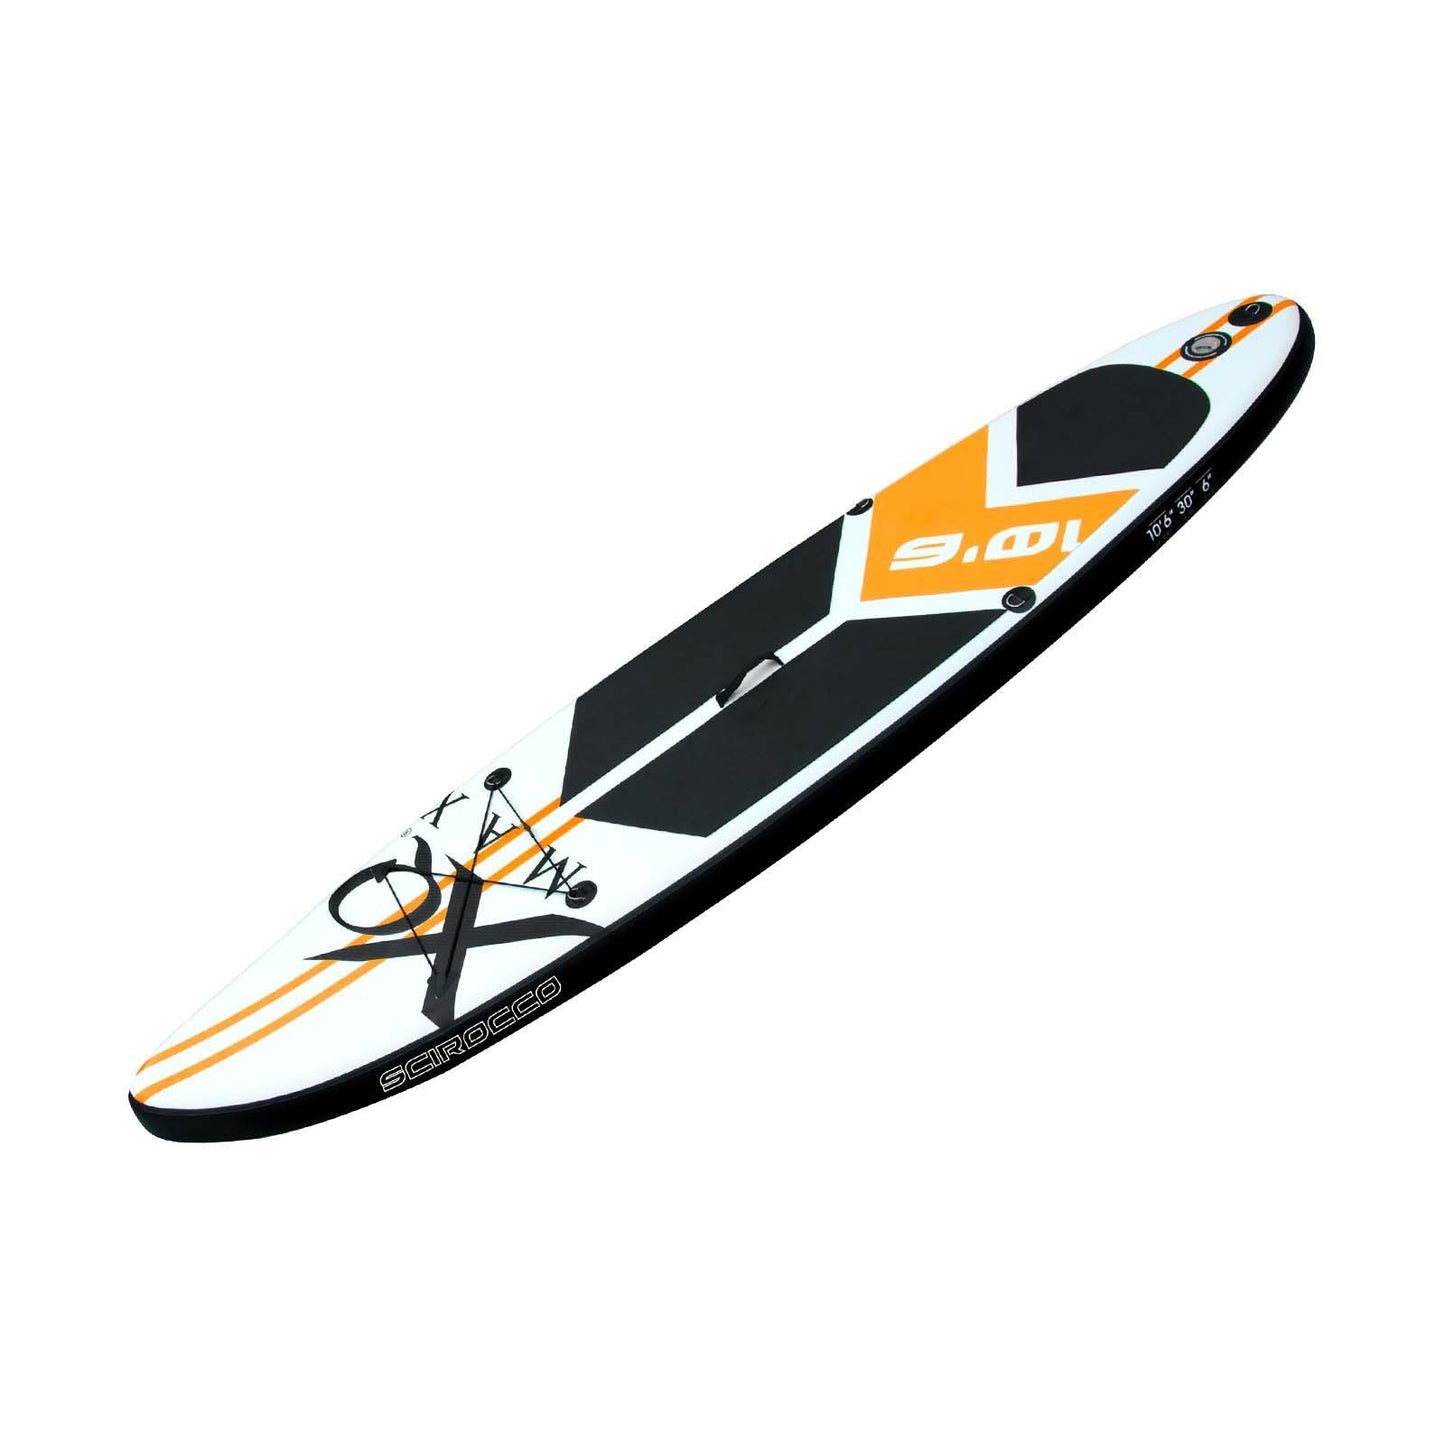 XQ Max 320cm 10.5ft Inflatable Standup Paddleboard SUP